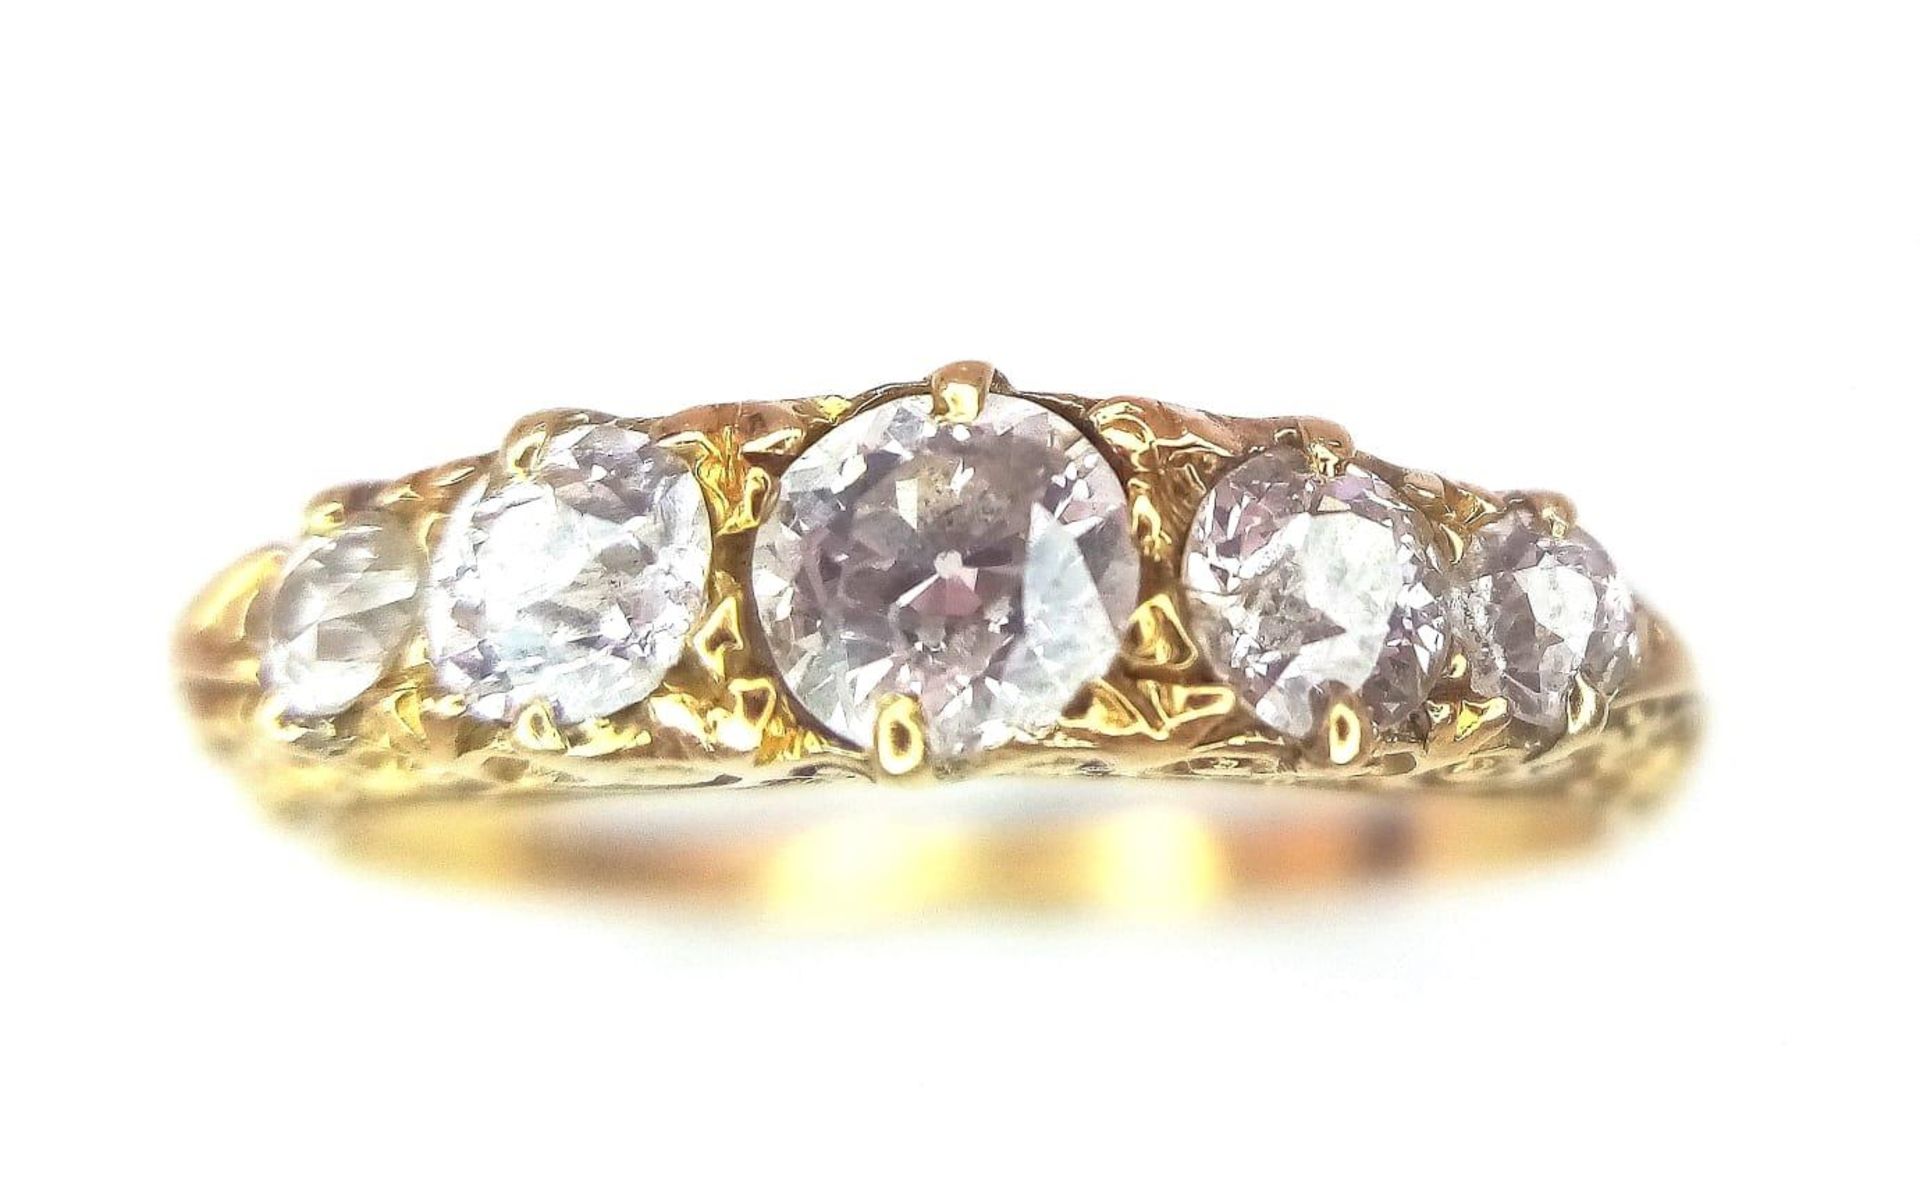 AN ANTIQUE 18K YELOW GOLD DIAMOND 5 STONE SET RING, WITH APPROX 0.60CT OLD CUT DIAMONDS, WEIGHT 2.5G - Image 7 of 13